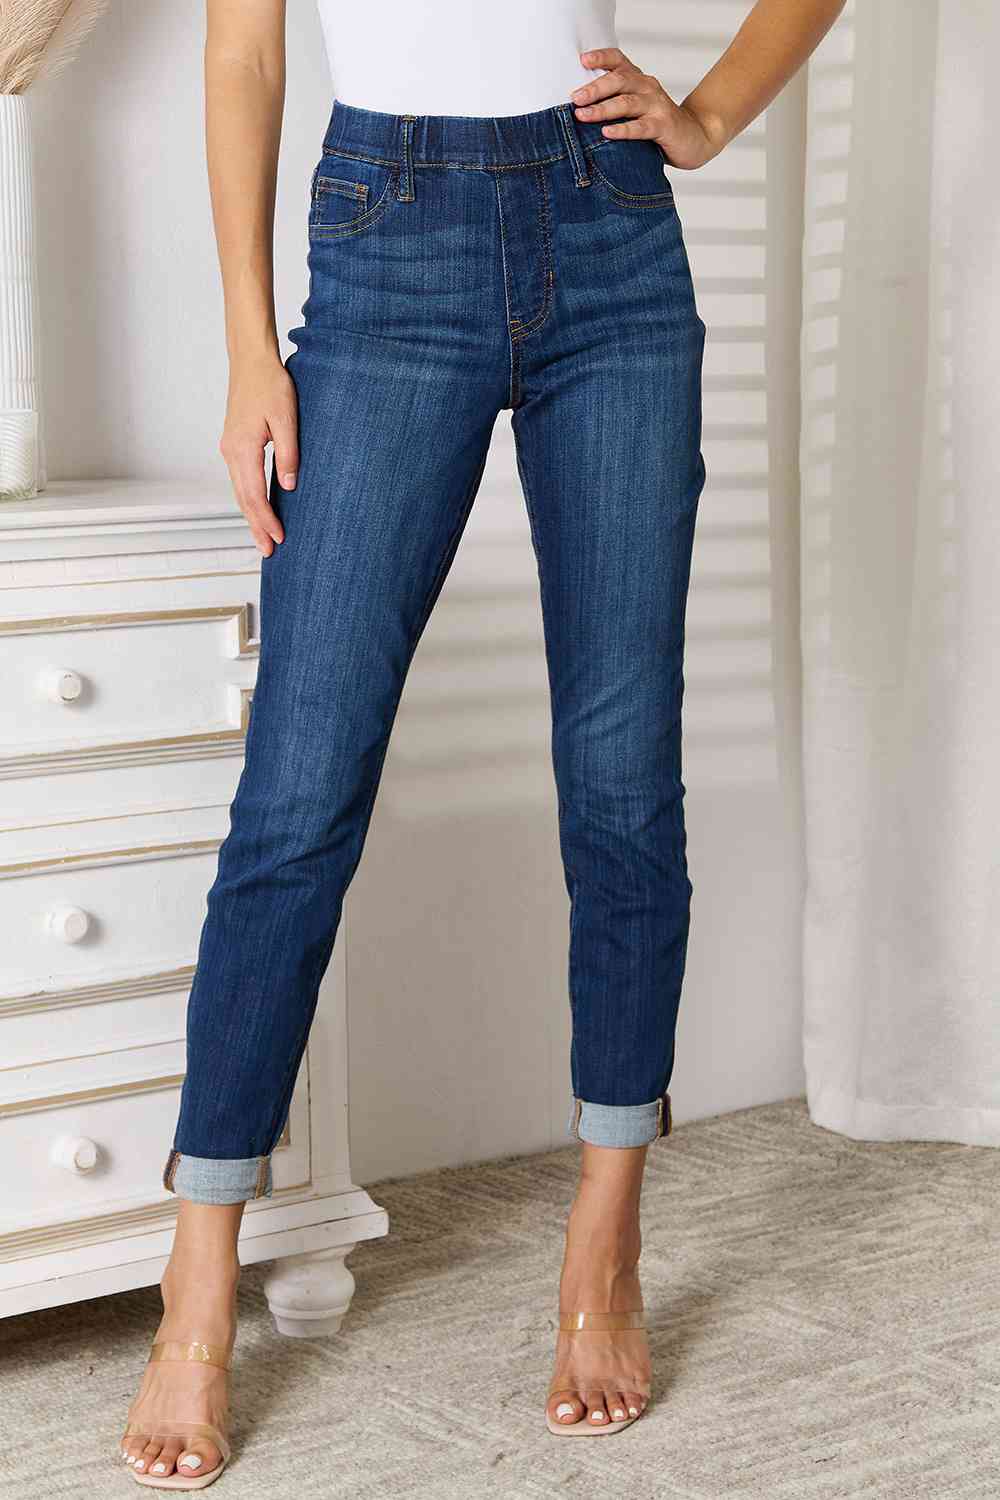 Judy Blue High Rise Pull On Skinny Cuffed Jeans